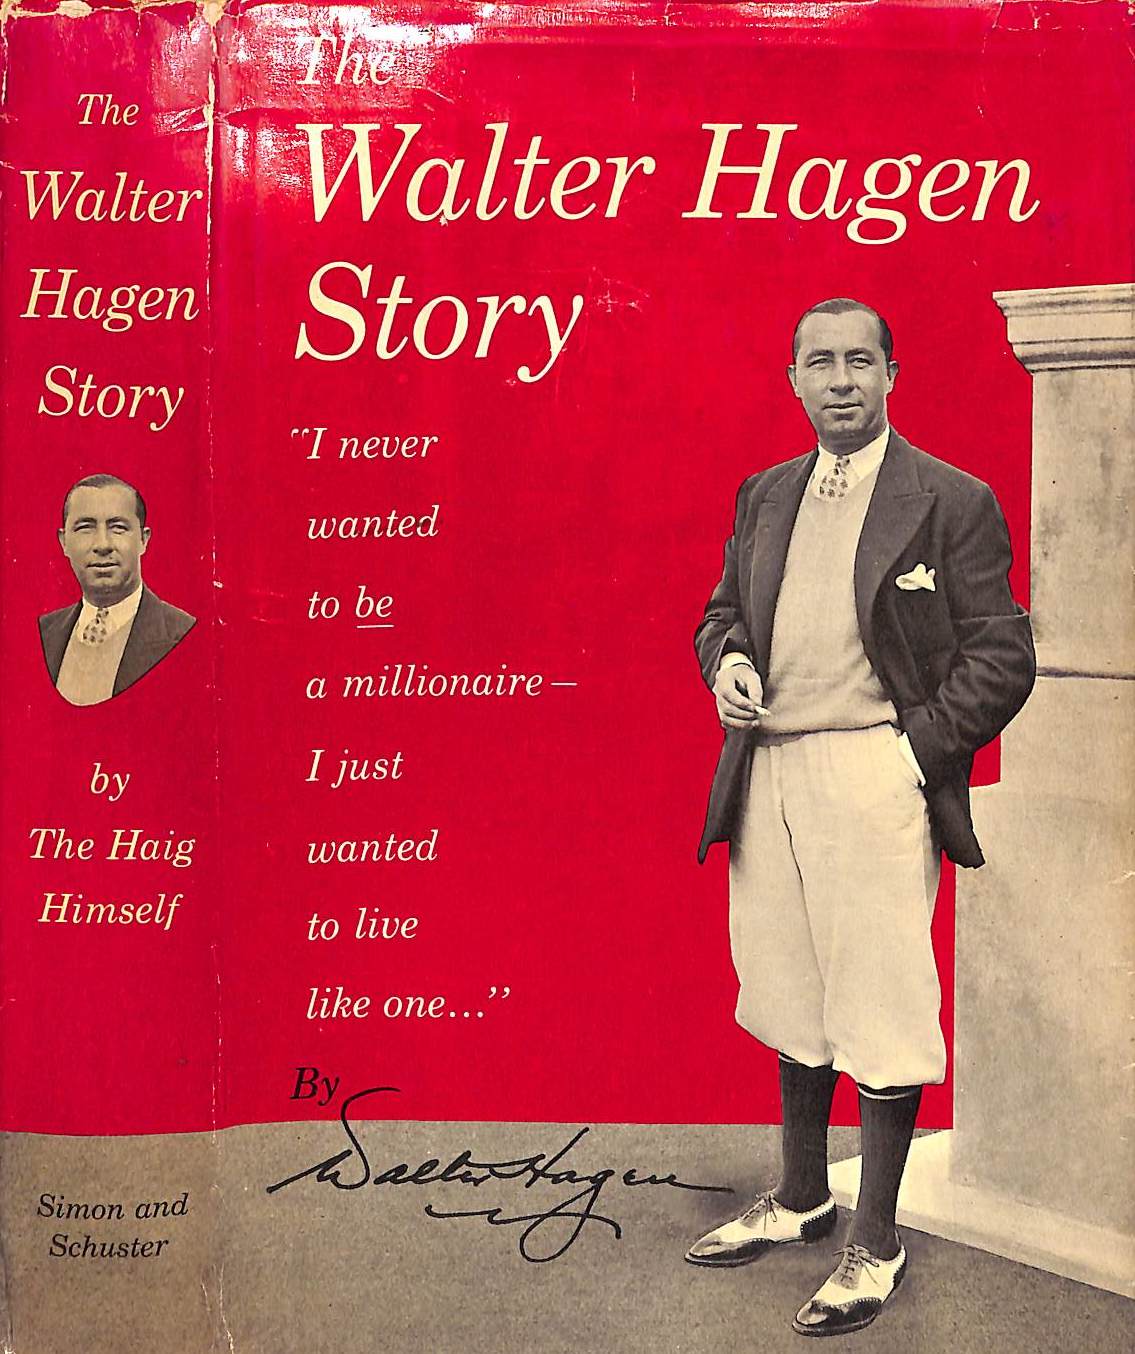 "The Walter Hagen Story By The Haig, Himself" 1956 (SOLD)